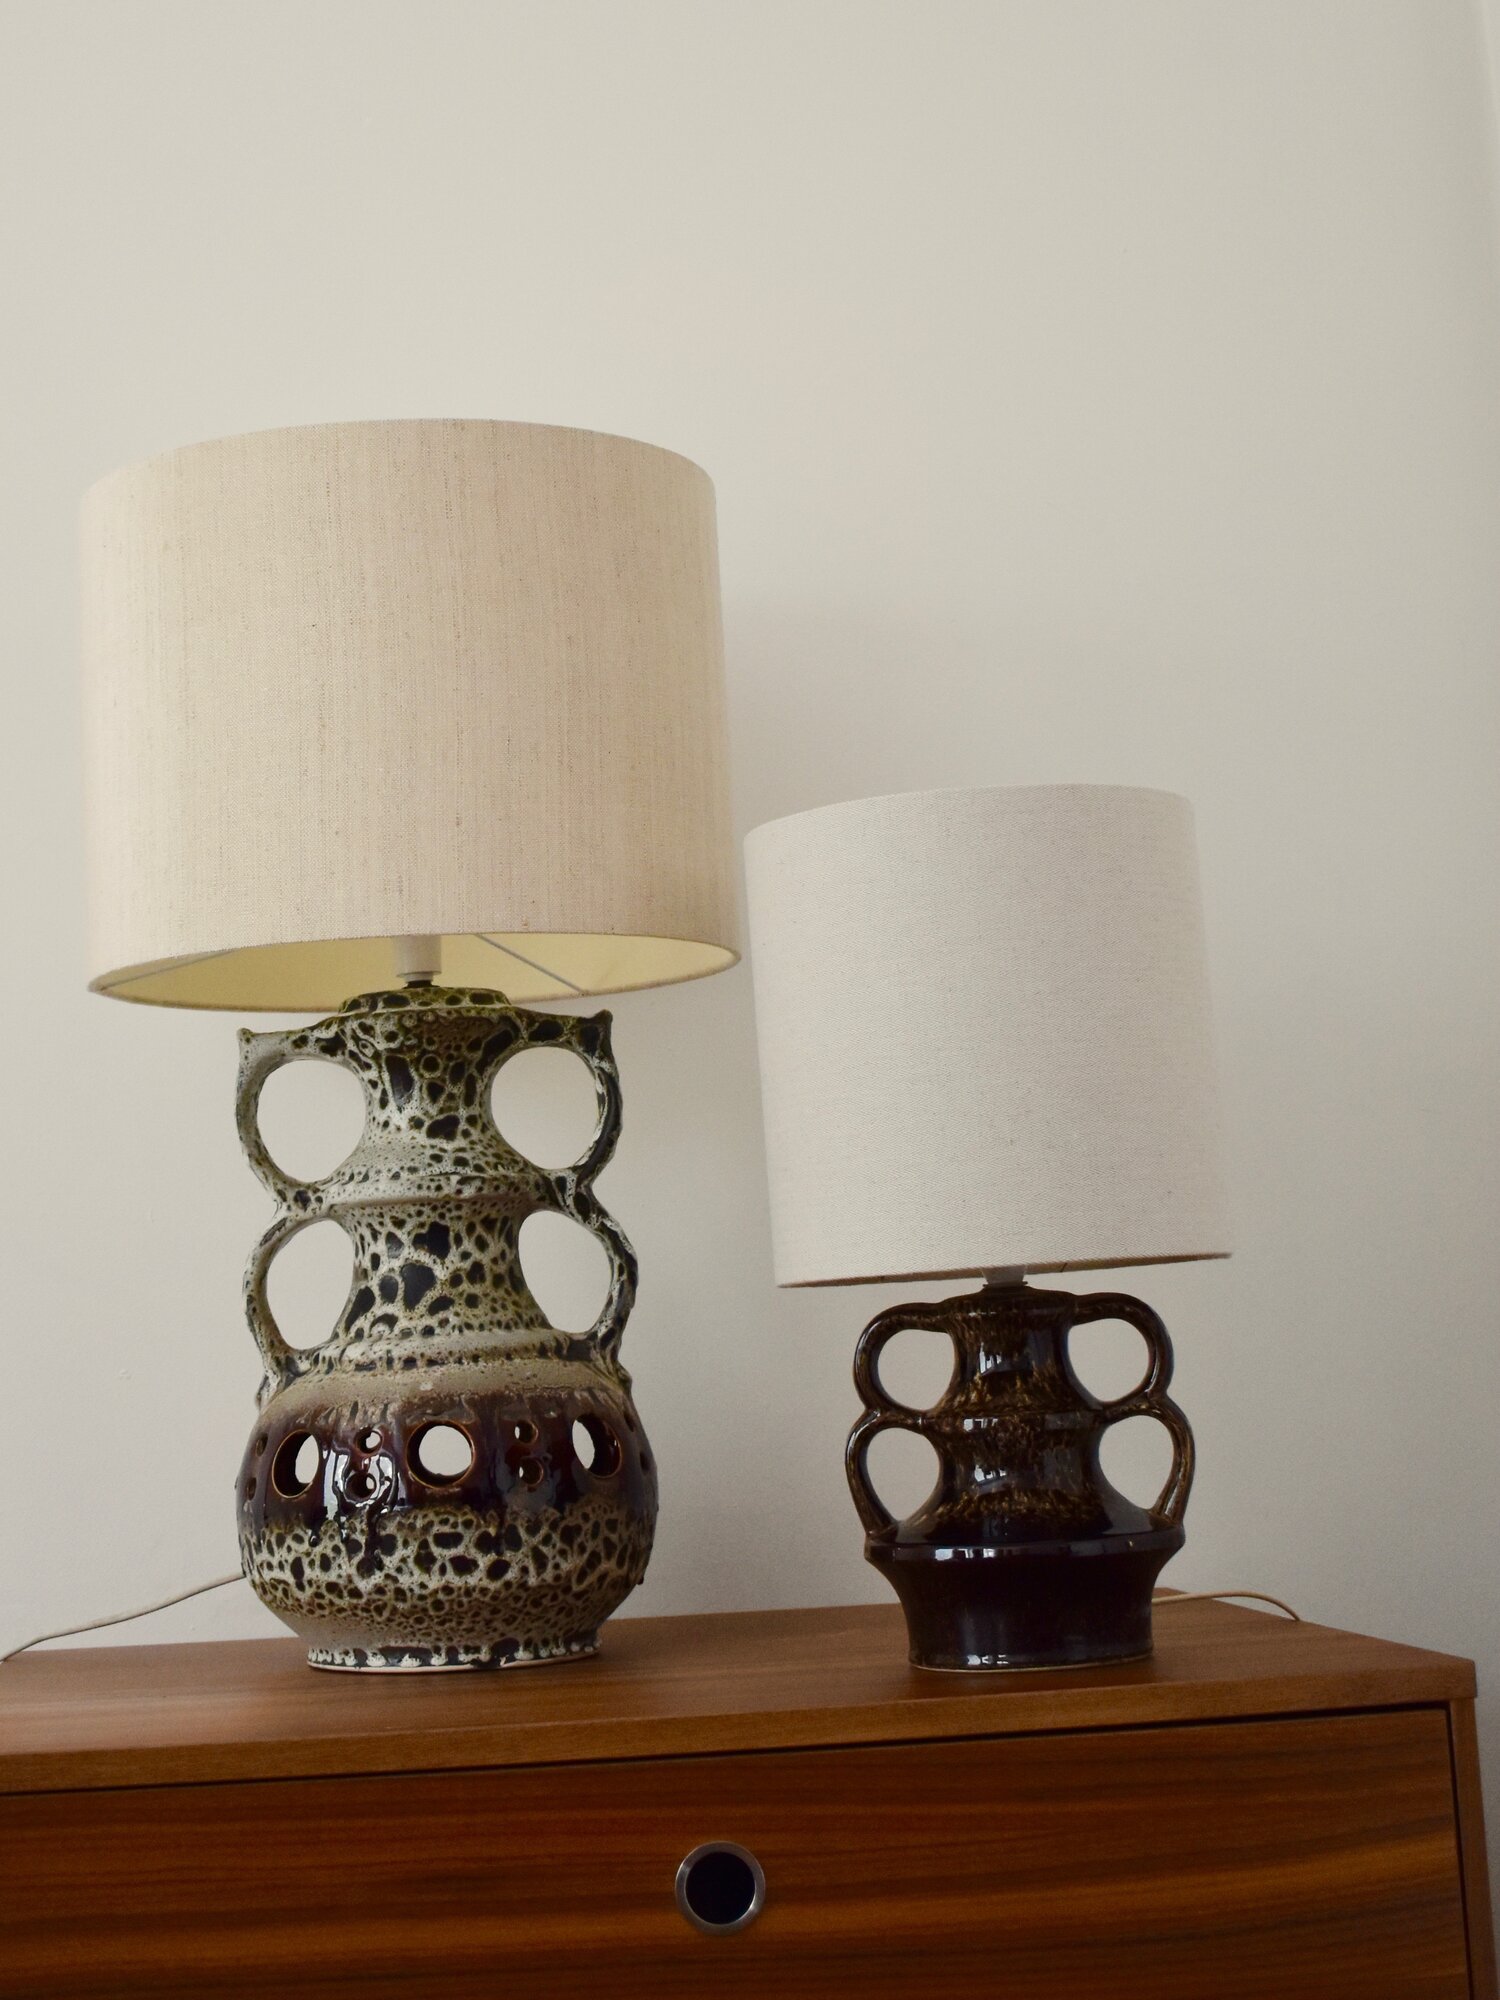 Drum Lamp Shades Feature Lighting Co Uk, Small Drum Lamp Shades Uk